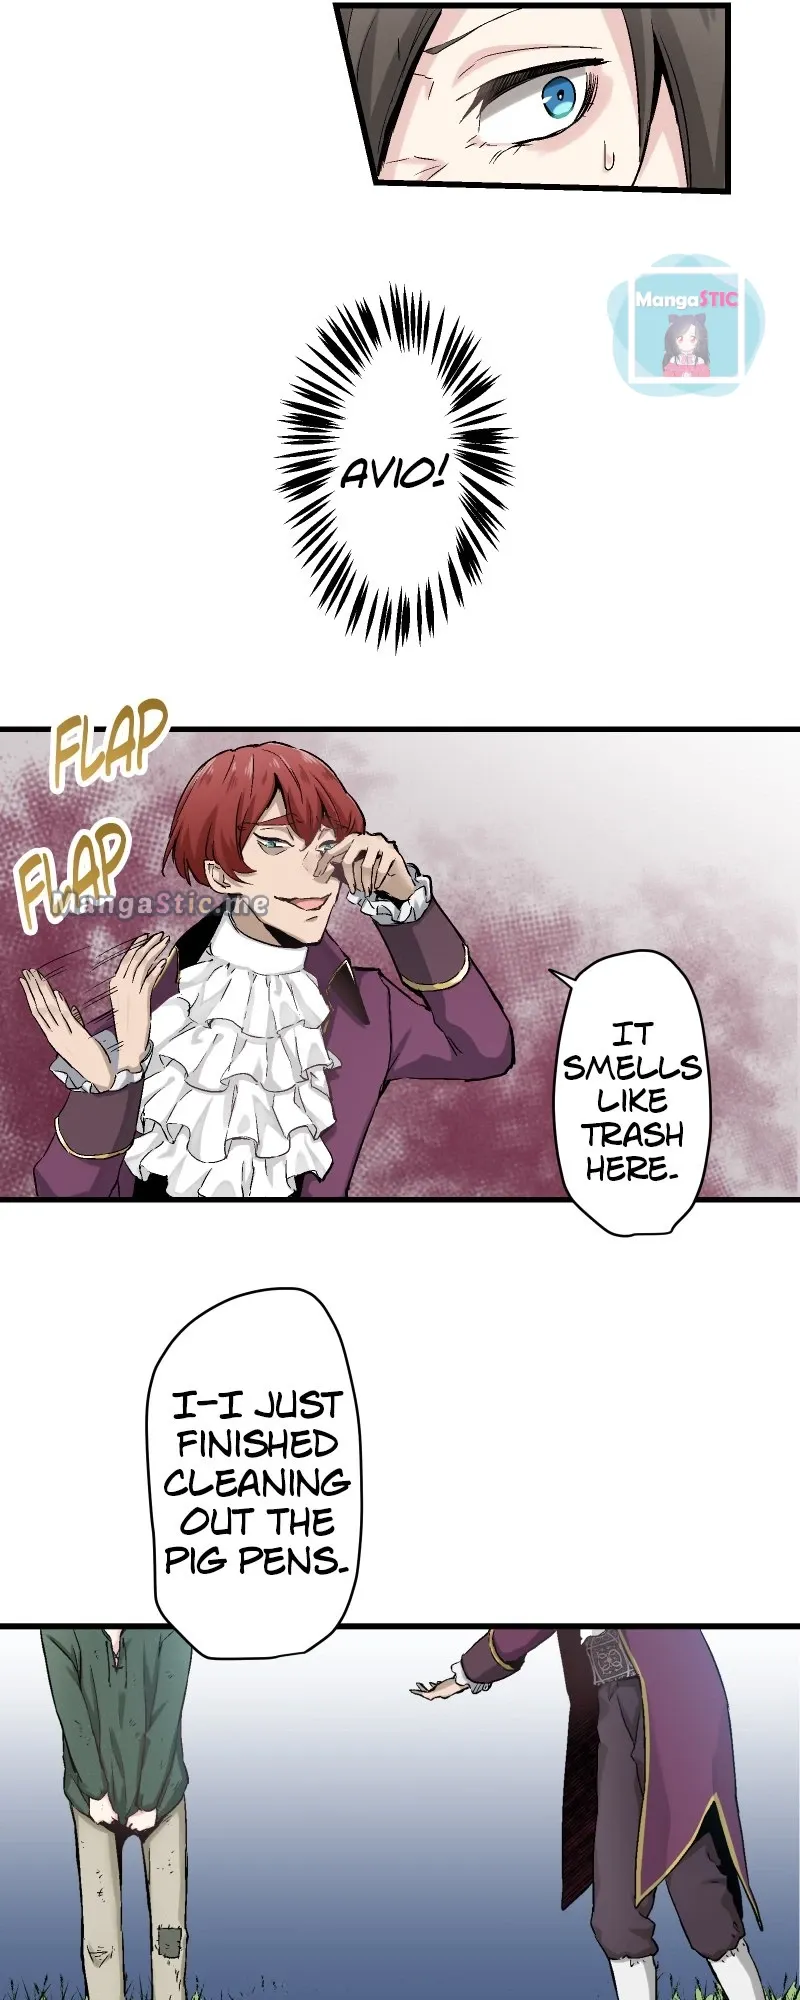 Nulliitas: The Half-Blood Royalty Chapter 61 page 58